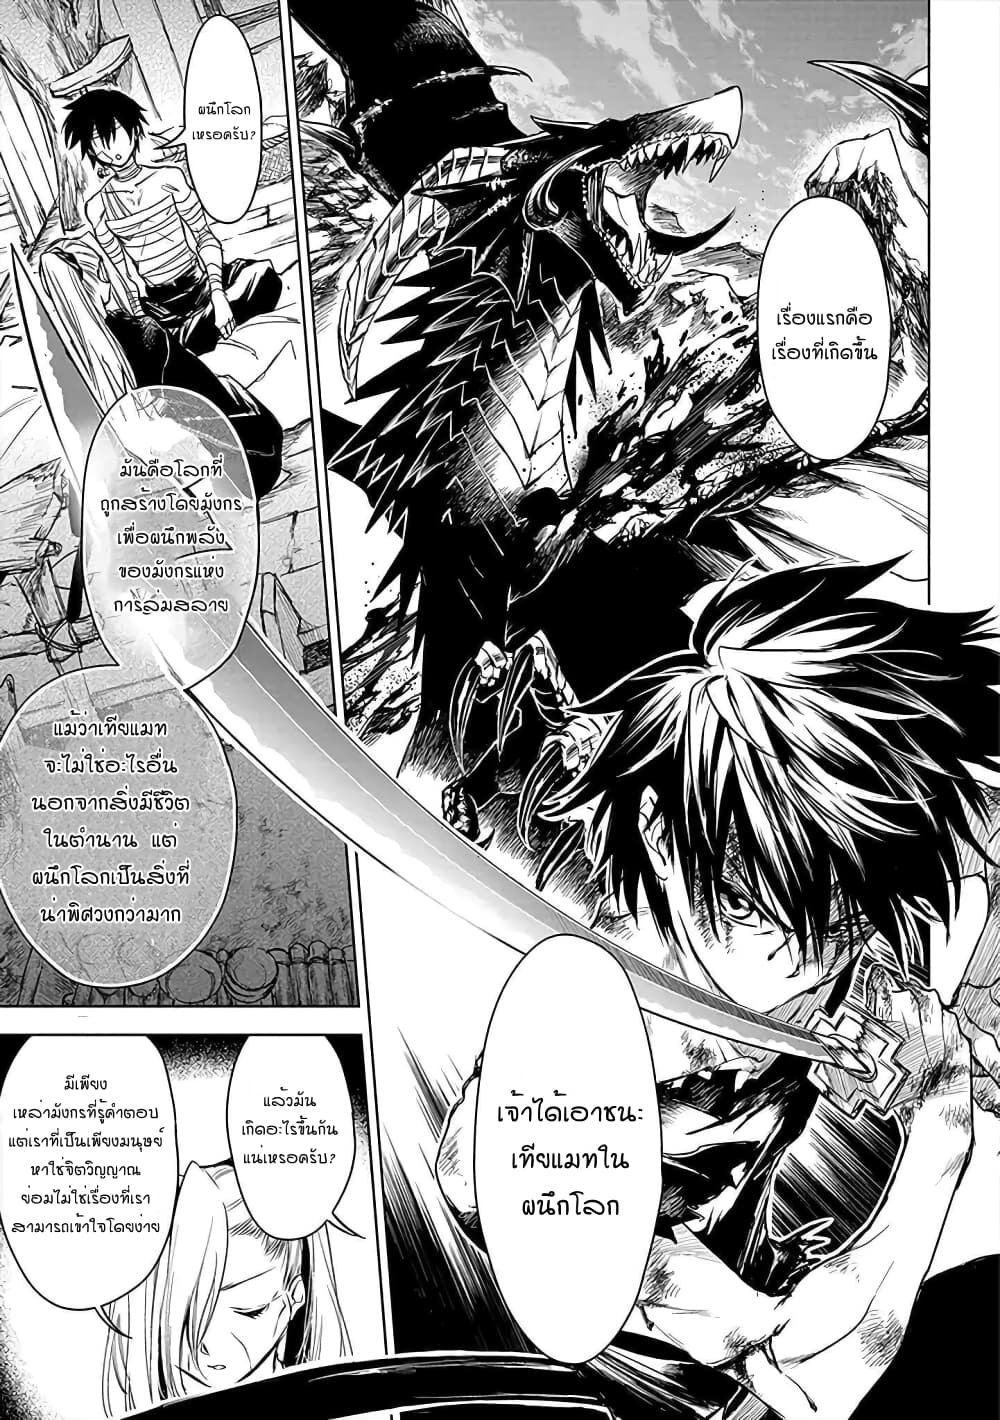 Ori of the Dragon Chain Heart in the Mind 9 (5)